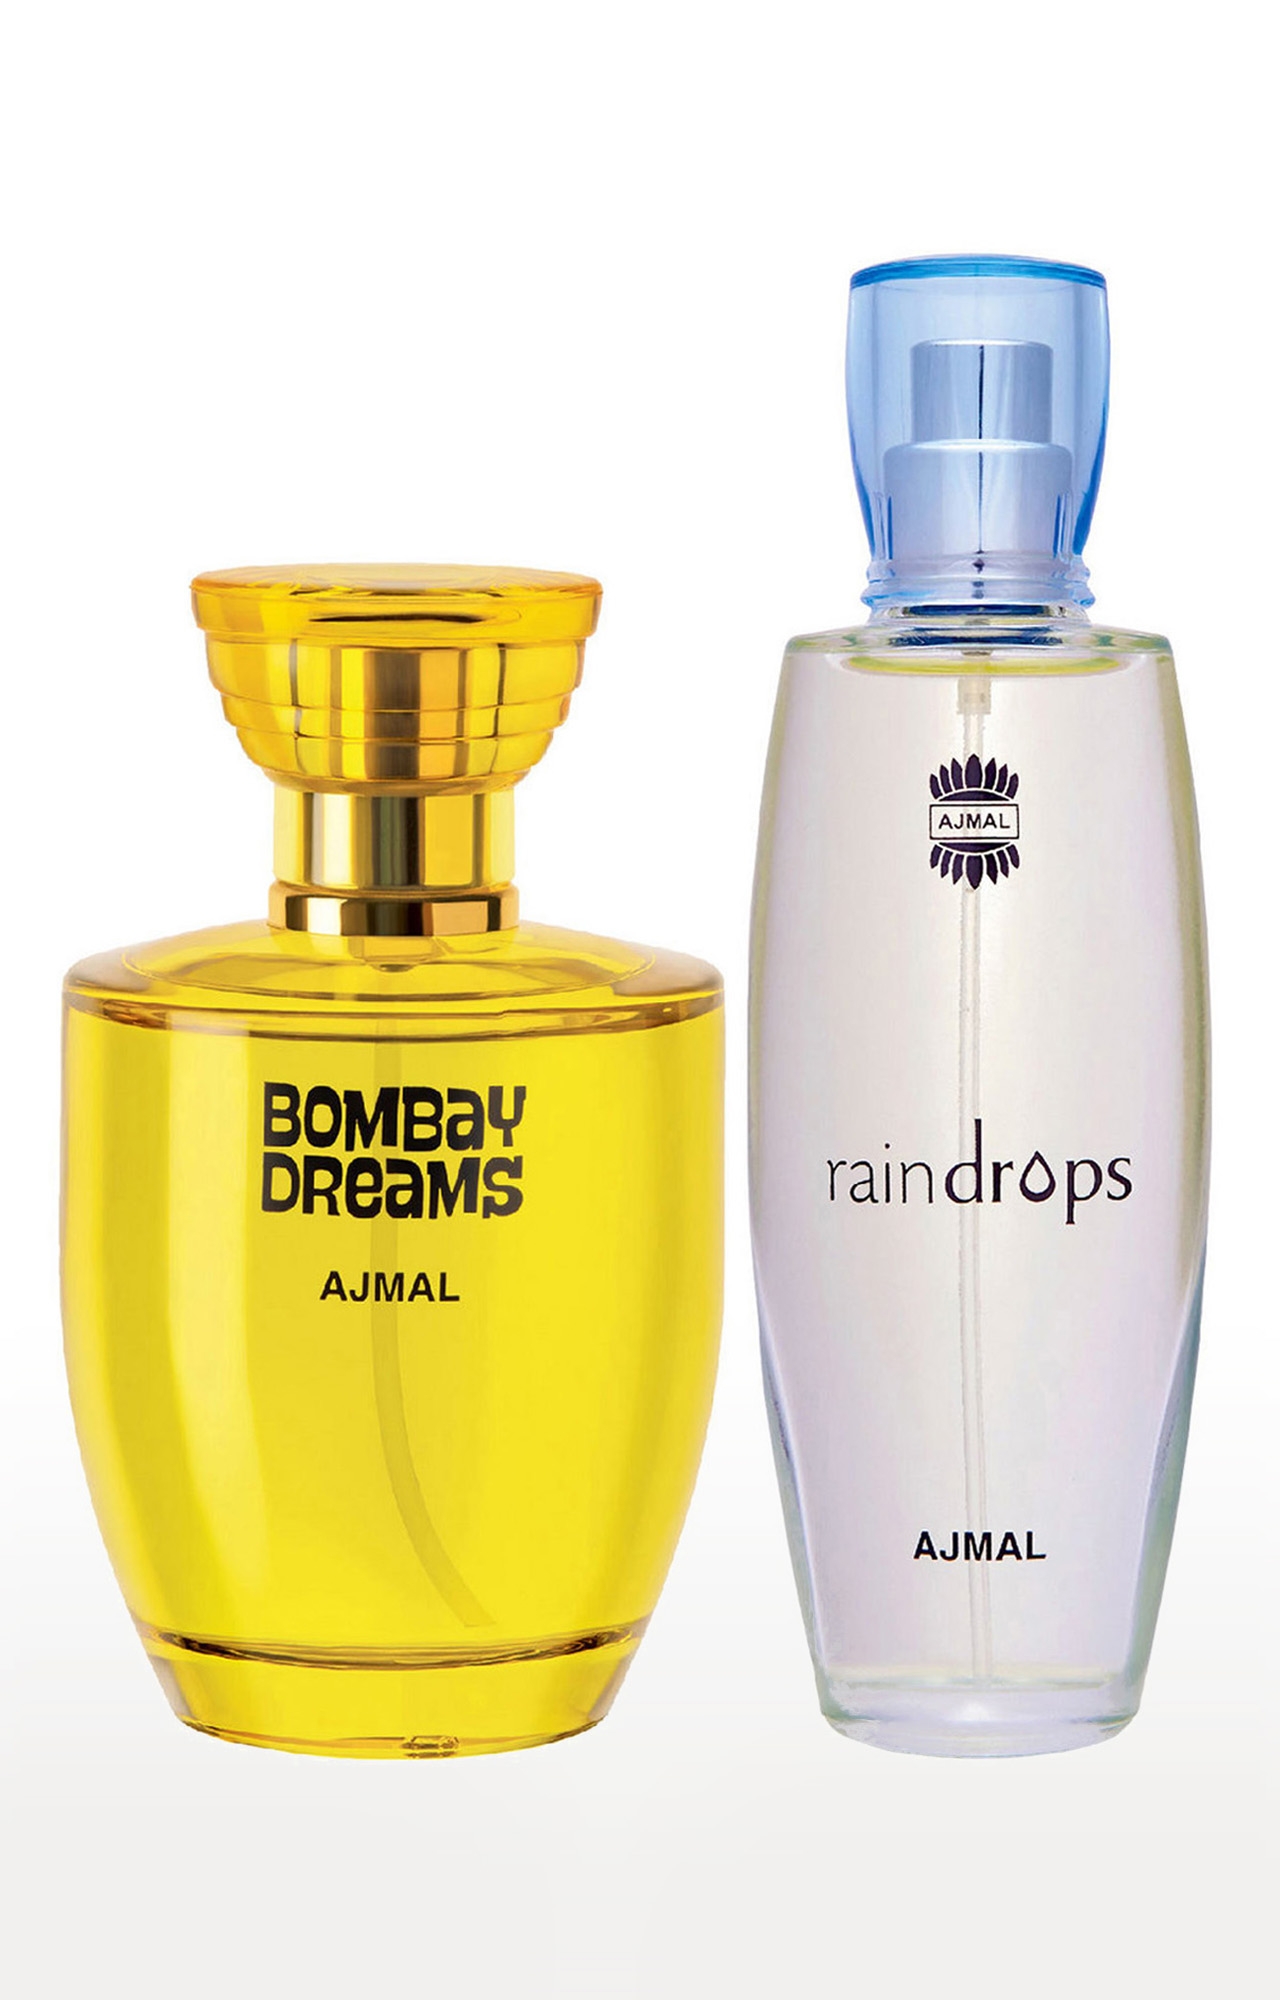 Ajmal | Ajmal Bombay Dreams Edp Floral Fruity Perfume 100Ml For Women And Raindrops Edp Floral Chypre Perfume 50Ml For Women